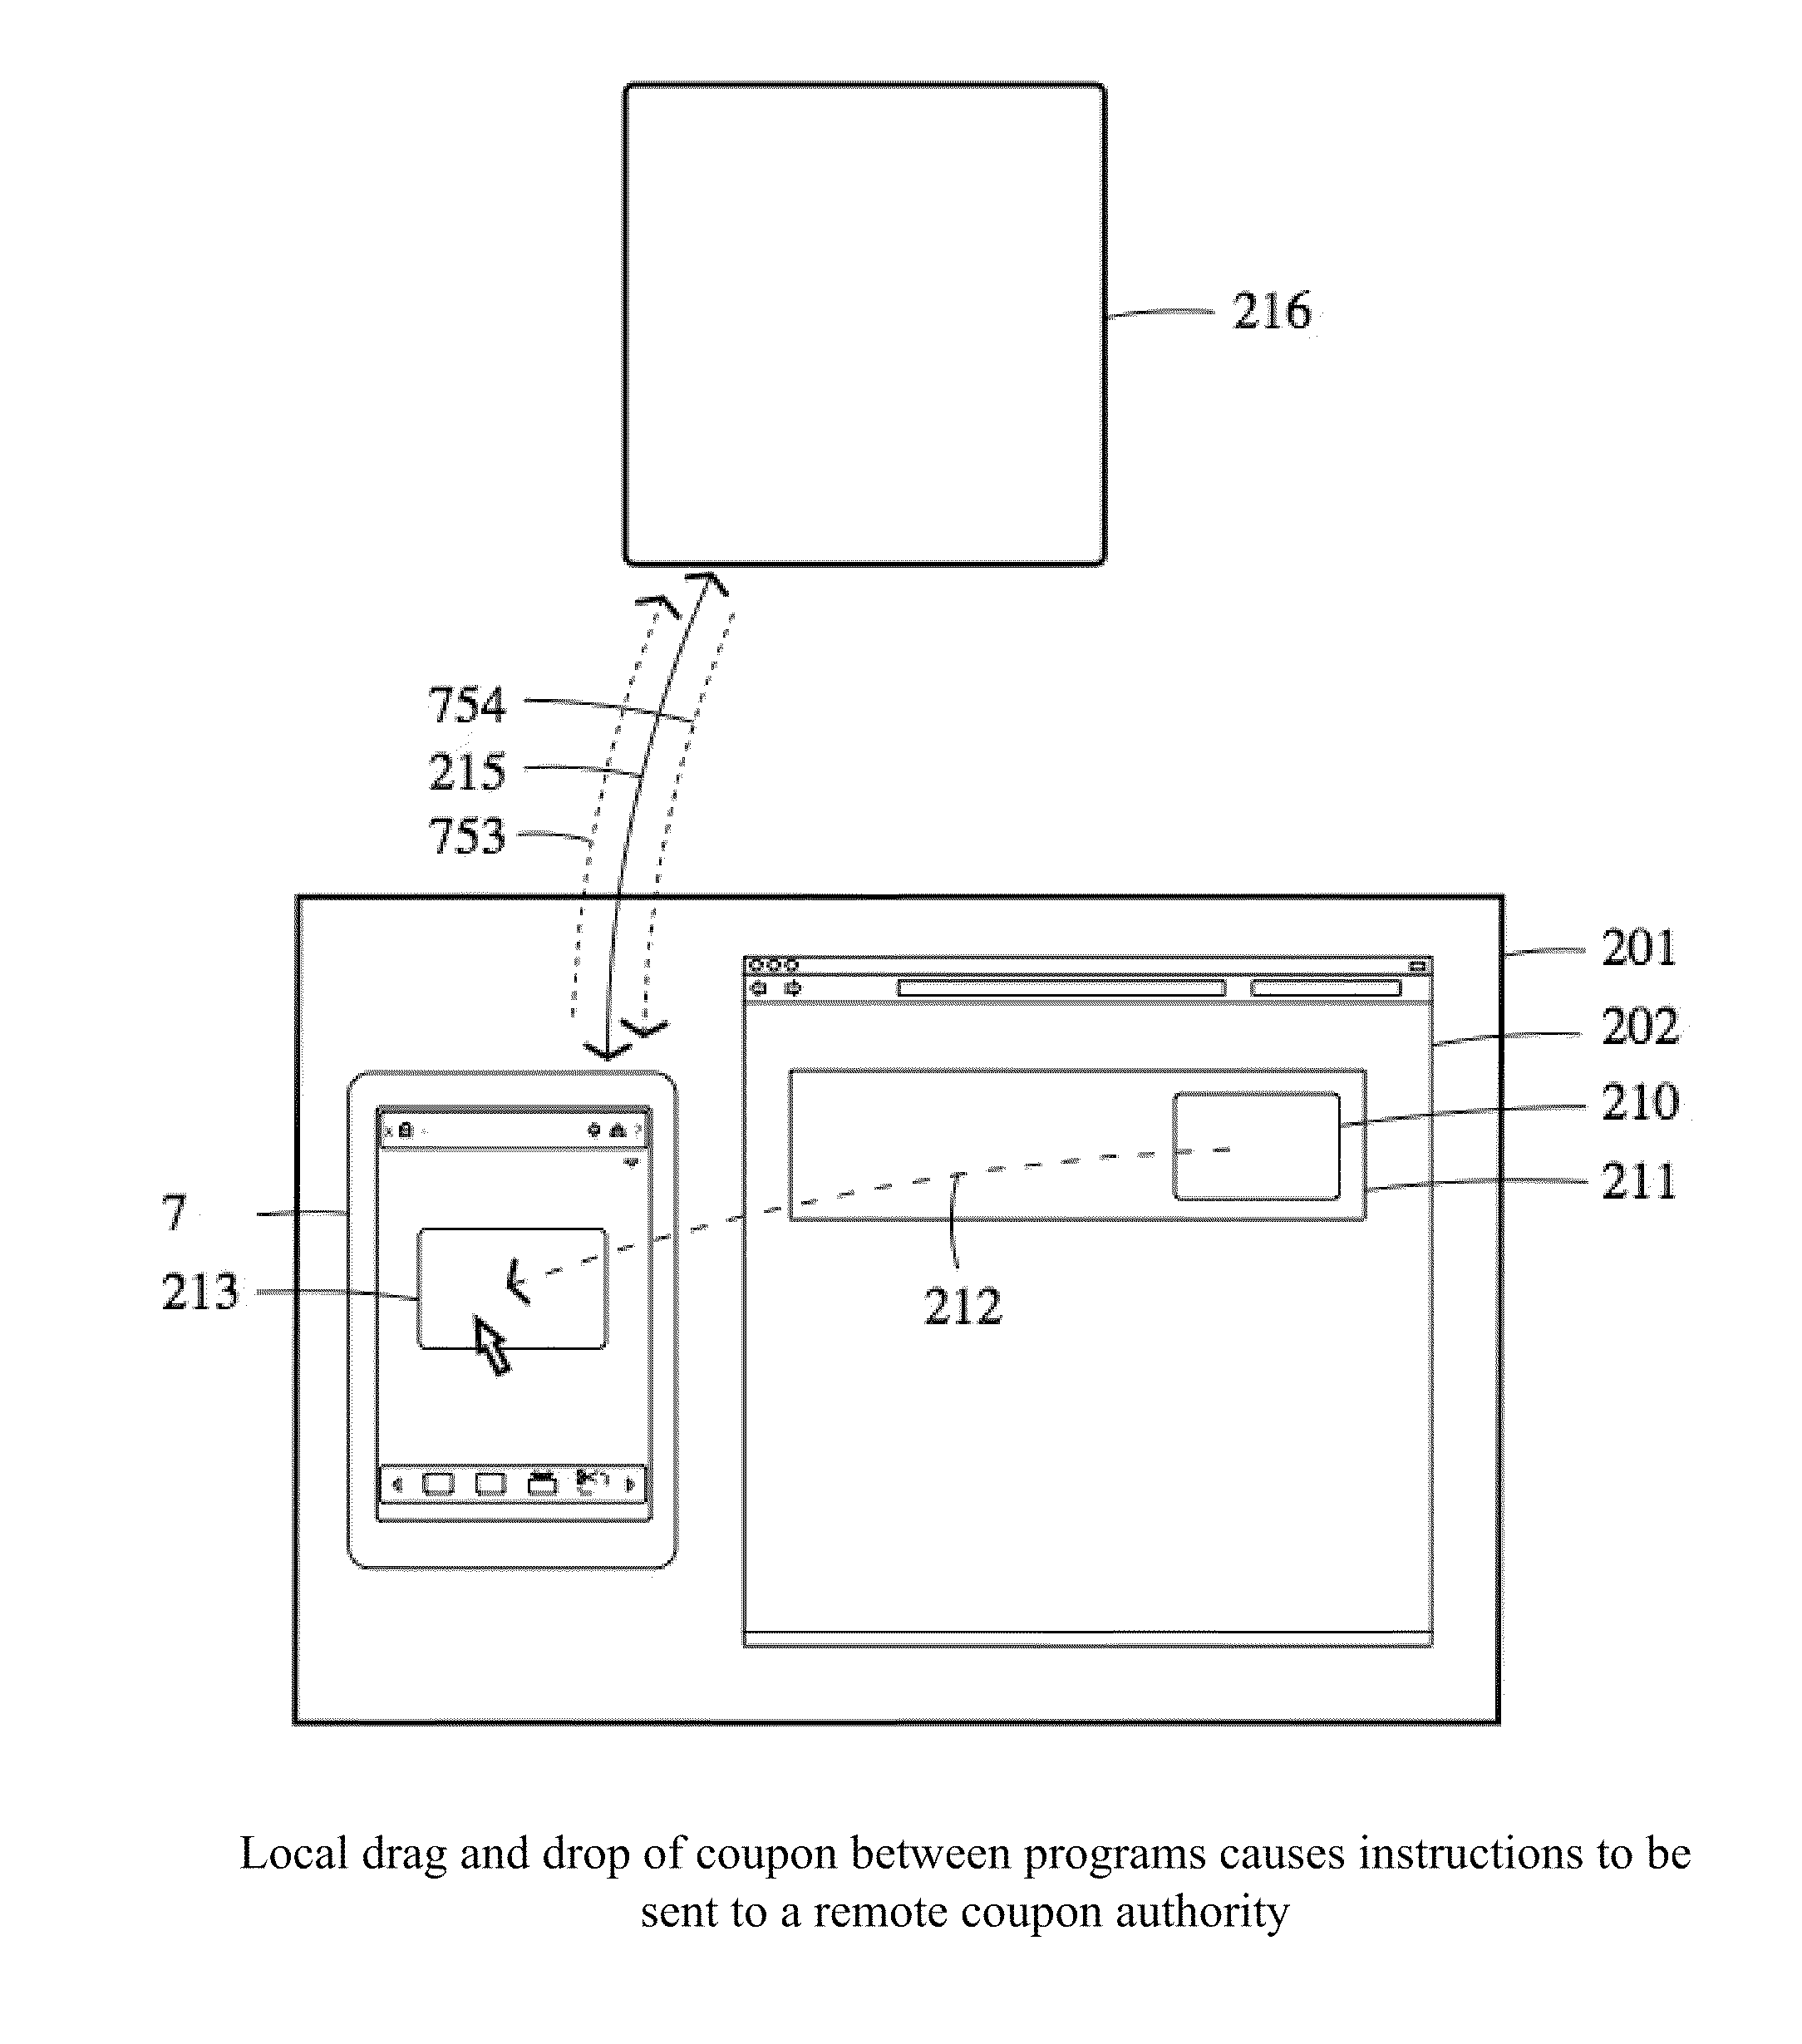 Dispensing digital objects to an electronic wallet